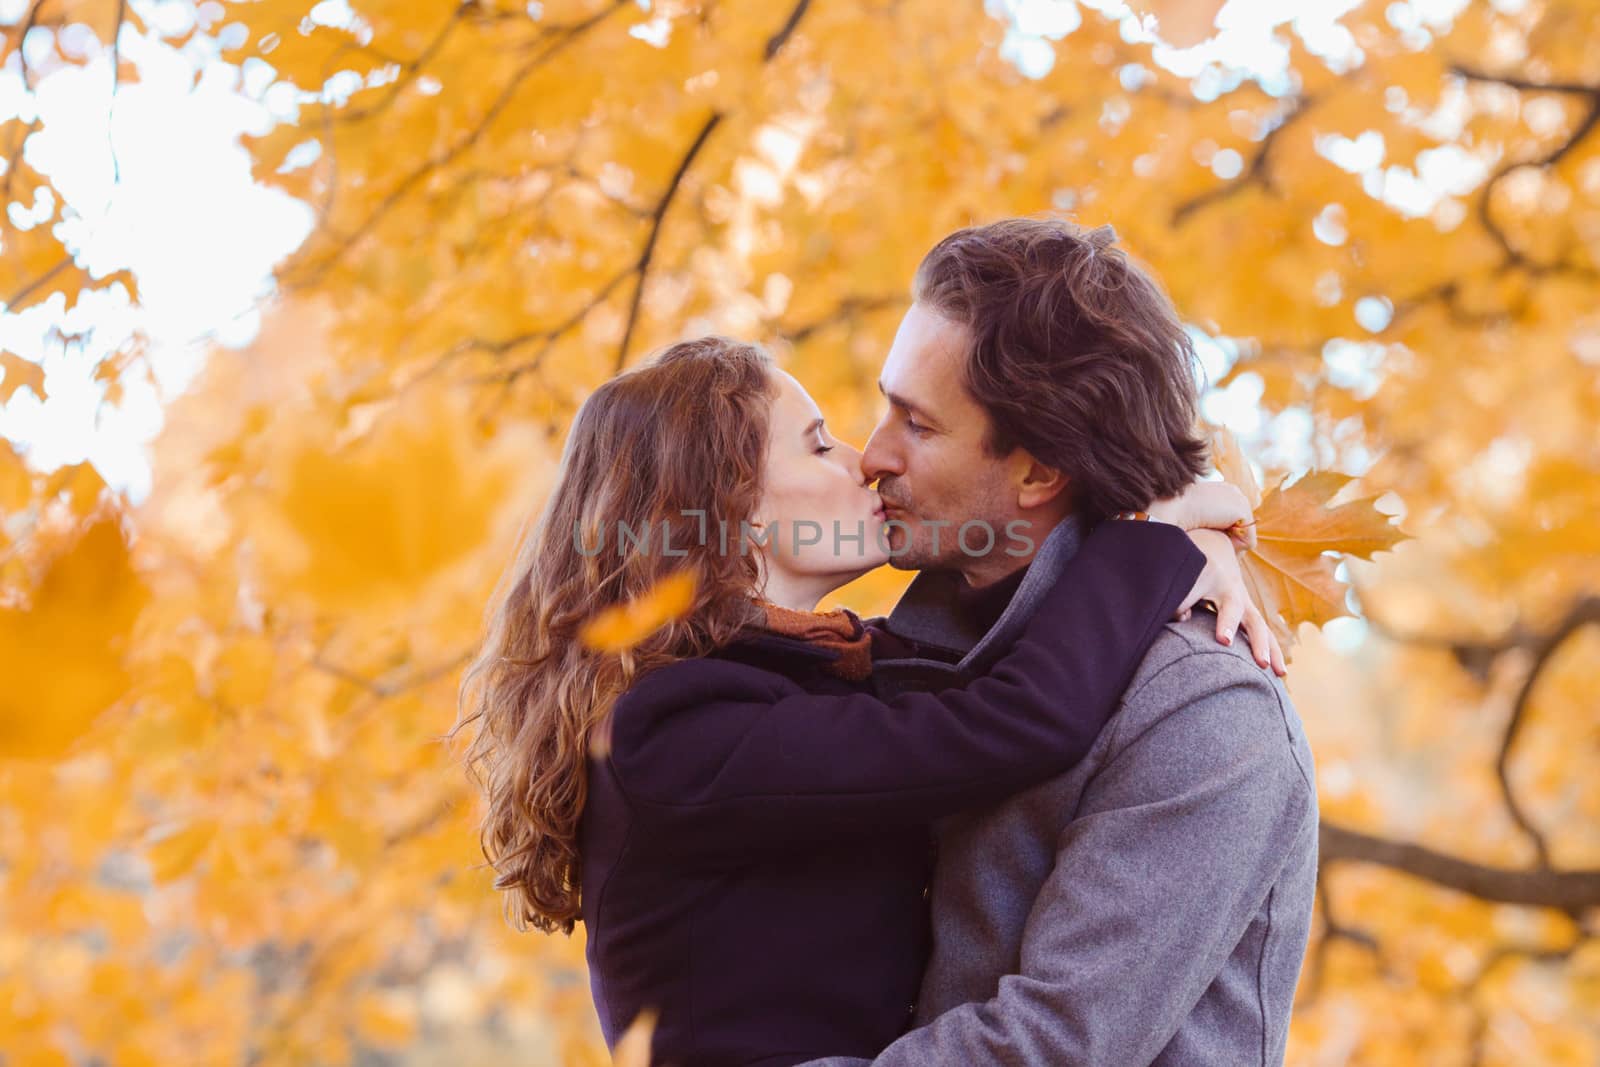 Couple kissing in autumn park by ALotOfPeople